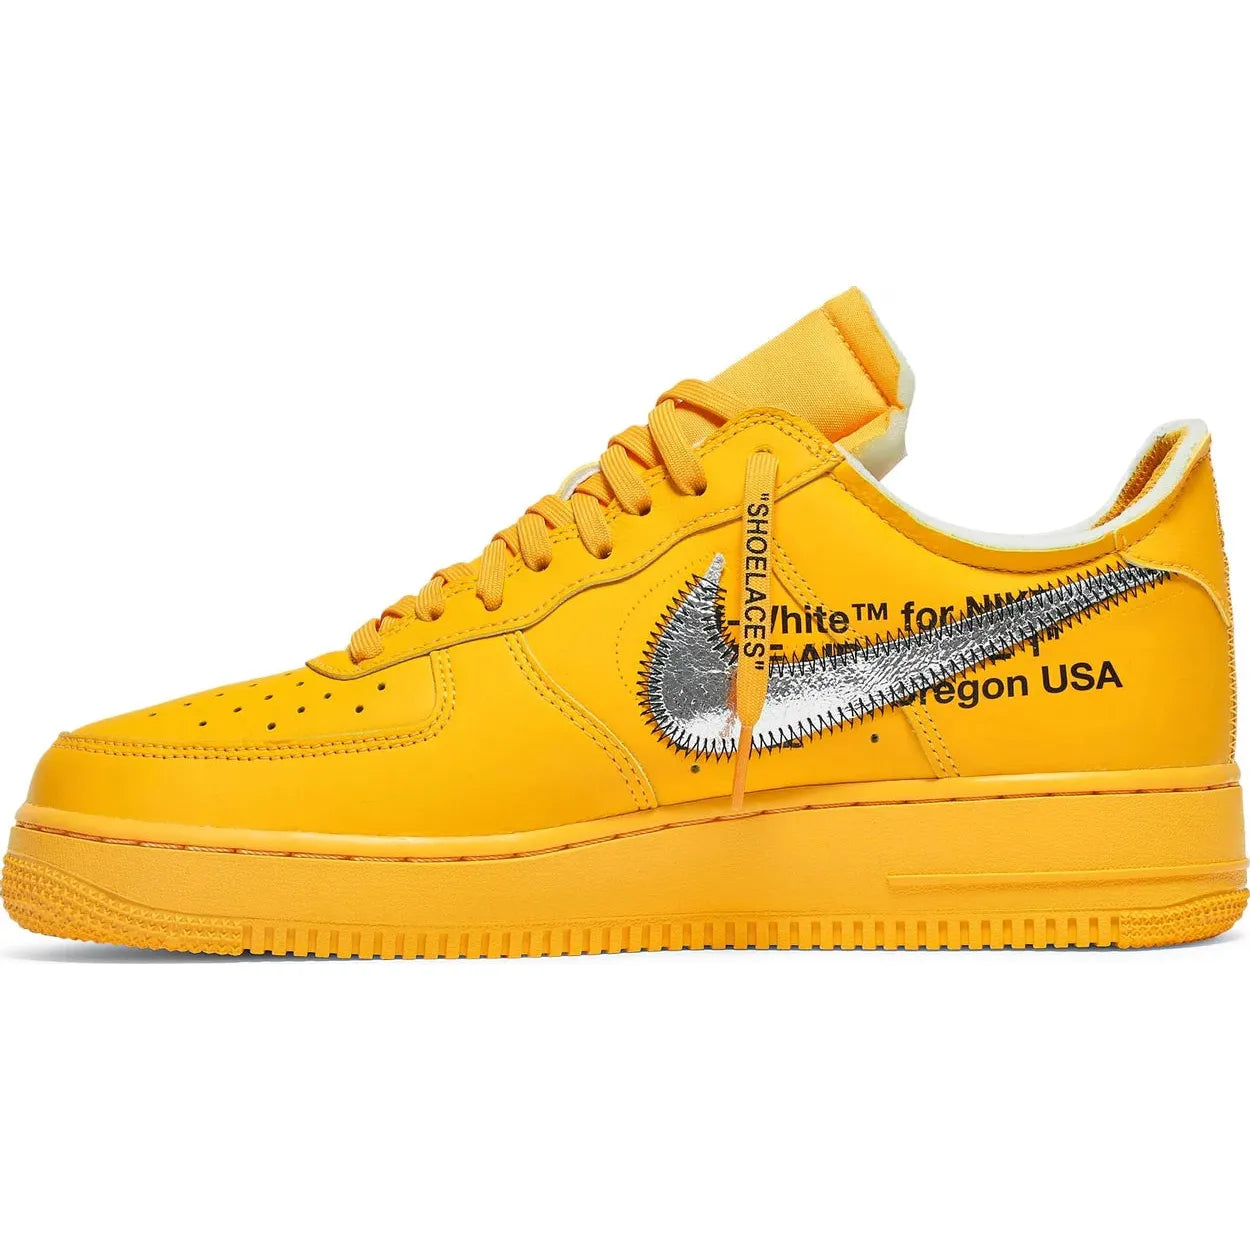 Nike Air Force 1 Low Off-White ICA University Gold by Nike from £1875.00